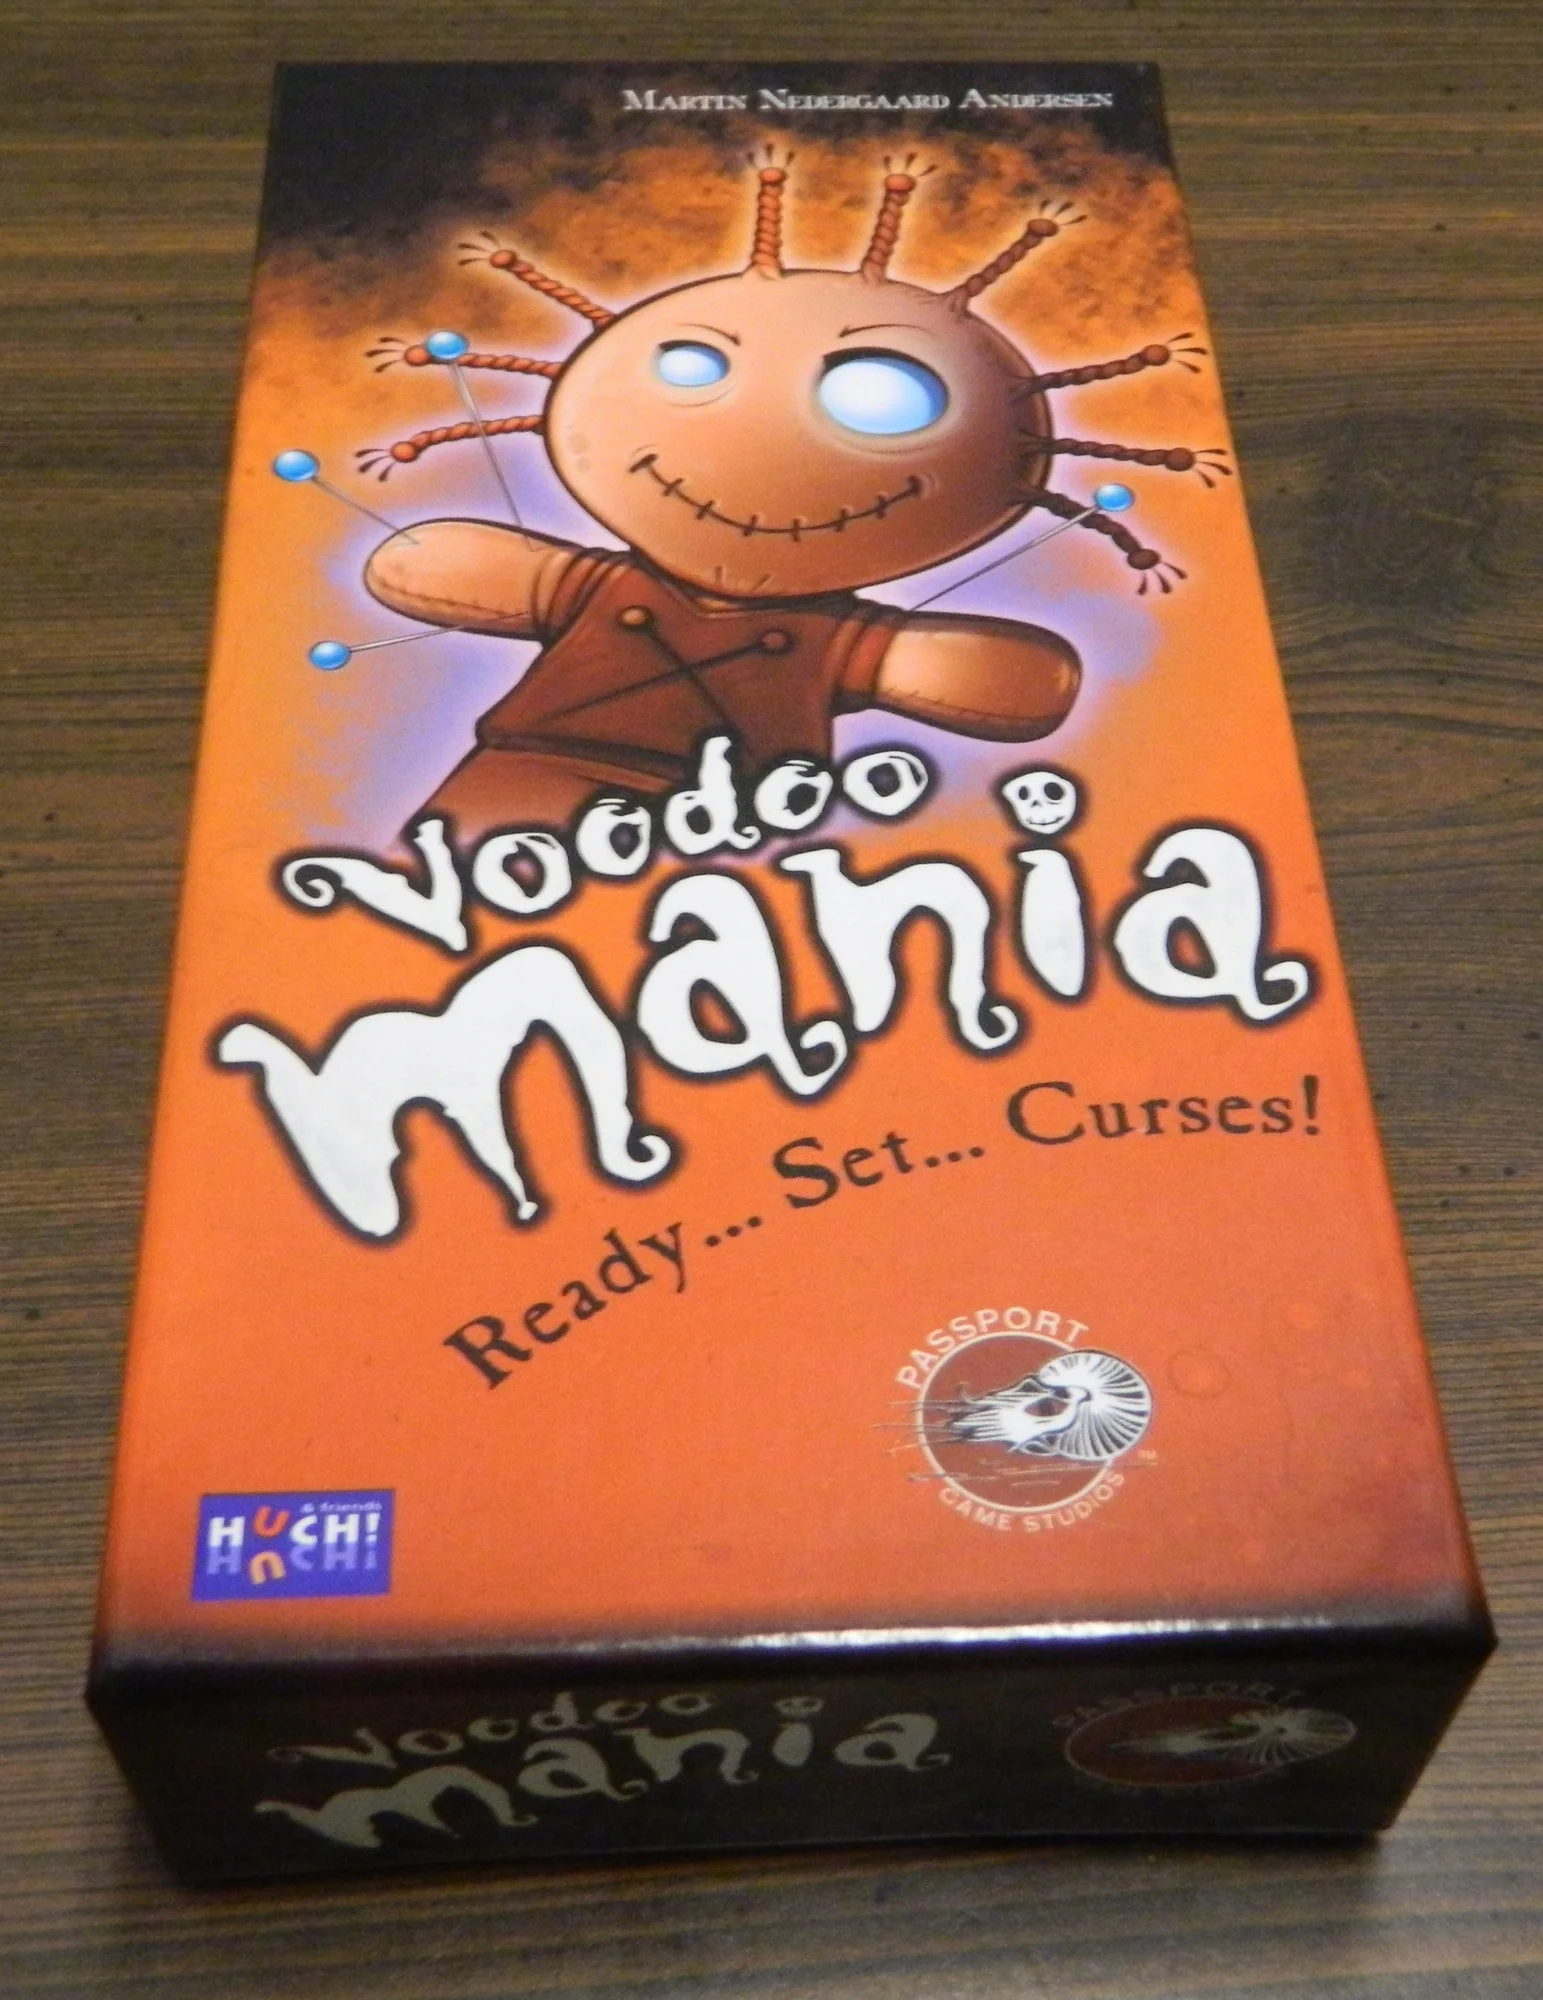 Box for Voodoo Mania